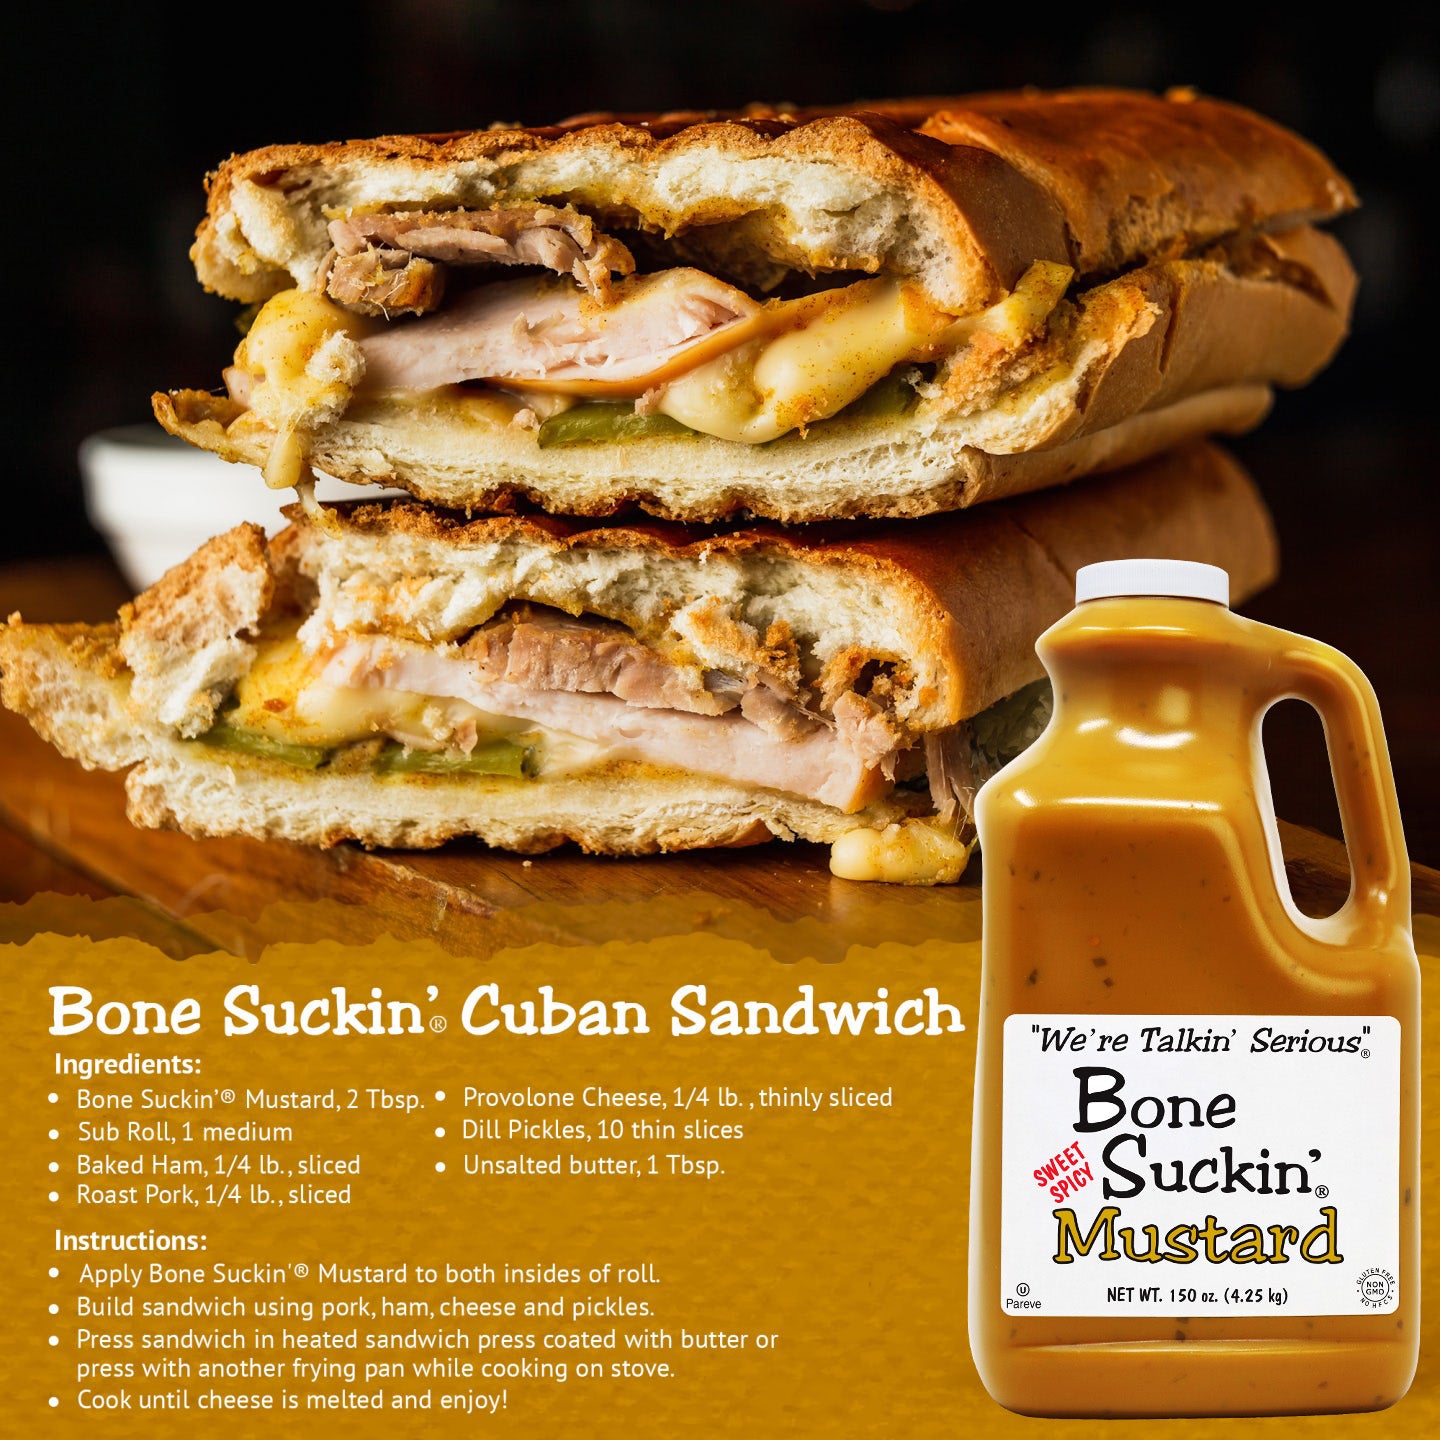 Bone Suckin Cuban Sandwich recipe. Ingredients: Bone Suckin Mustard, 2 Tbsp, Sub Roll, 1 medium, Baked Ham, Roast Pork, Unsalted butter, 1 Tbsp, Provolone Cheese, 1/4 lb, thinly sliced, Dill Pickles, 10 thin slices. Instructions: Apply Bone Suckin' Mustard to both insides of roll. Build sandwich using pork, ham, cheese and pickles. Press sandwich in heated sandwich press coated with butter or press with another frying pan while cooking on stove. Cook until cheese is melted and enjoy.